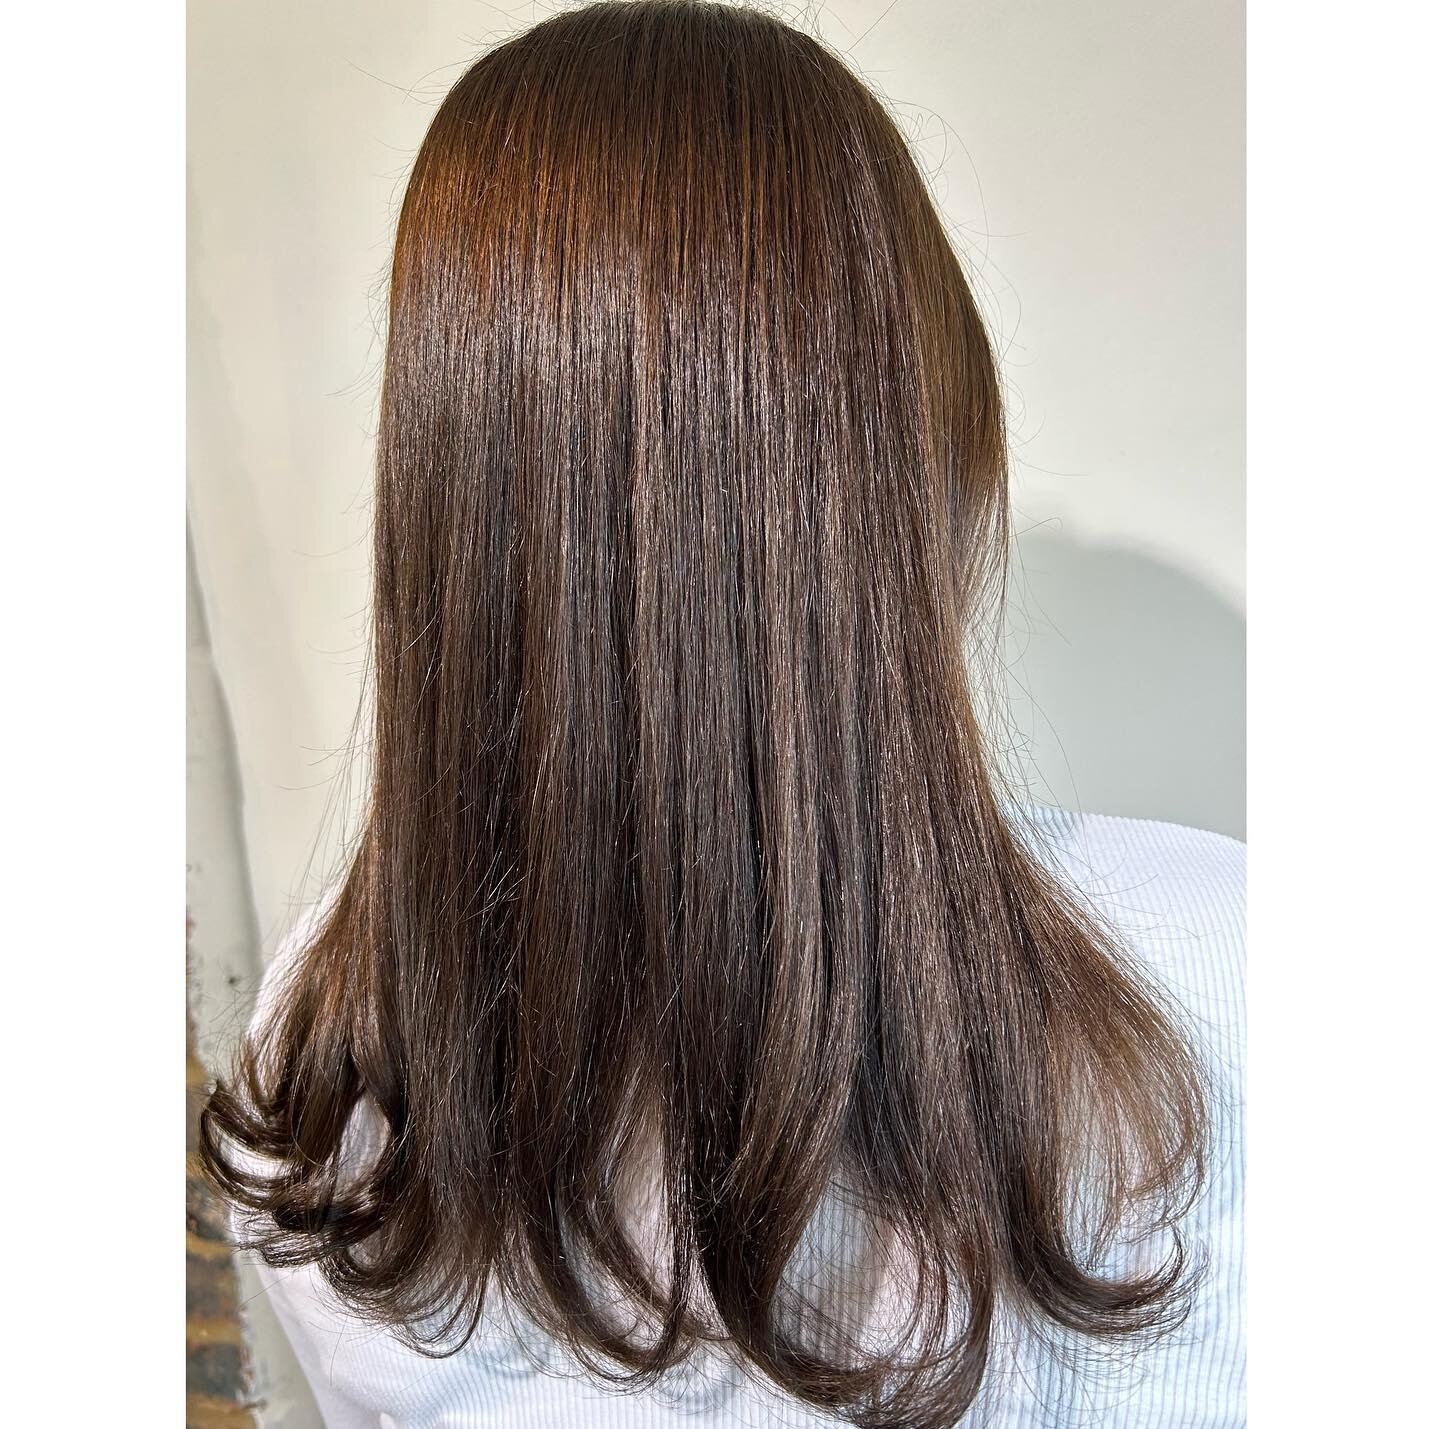 Glossy brunette, finished with a flicky blow-dry🐻🤎 #hairdresser #hair #newhair #glossyhair #diarichesse #loreal #lorealpro #lorealsalon #lorealprouk #stylist #hairfashion #hairbrained #hairtutorial #hairtransformation #salonlife #hairdresseruk #ukh